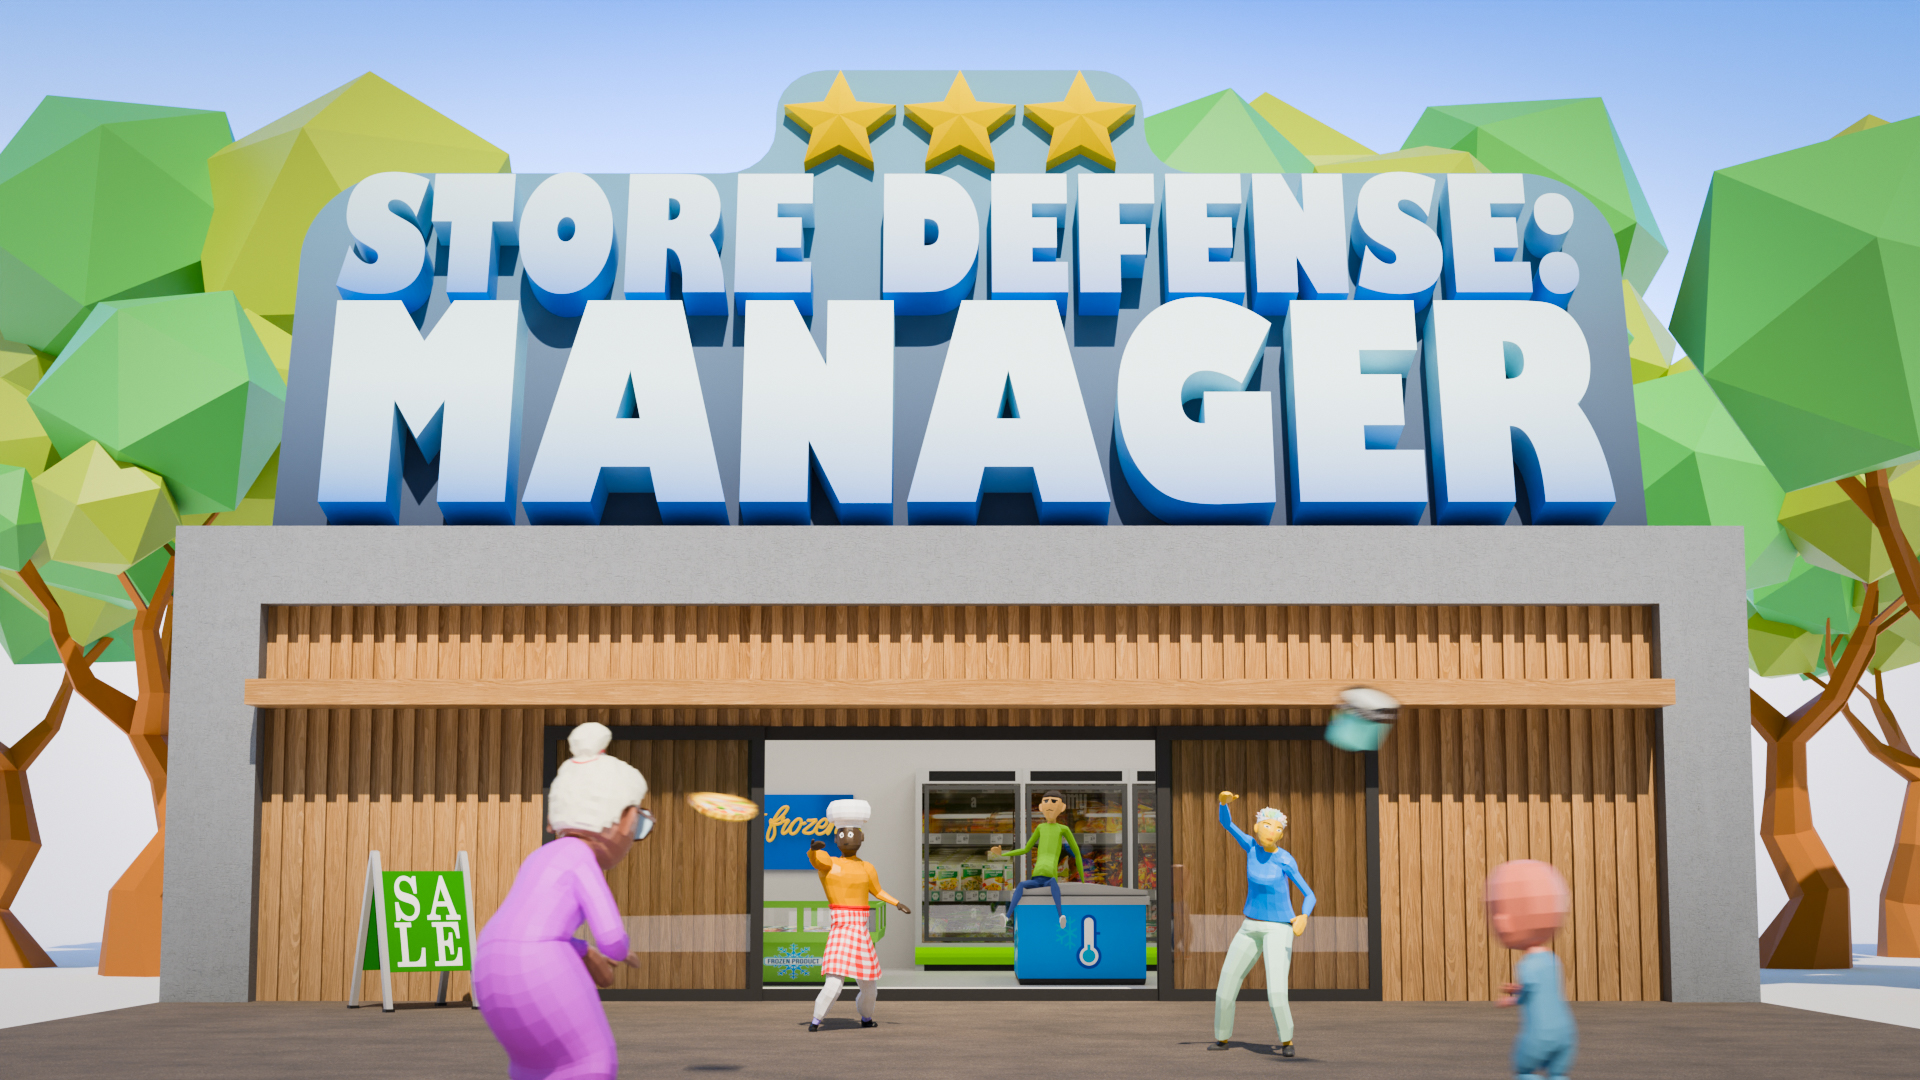 Store Defense: Manager